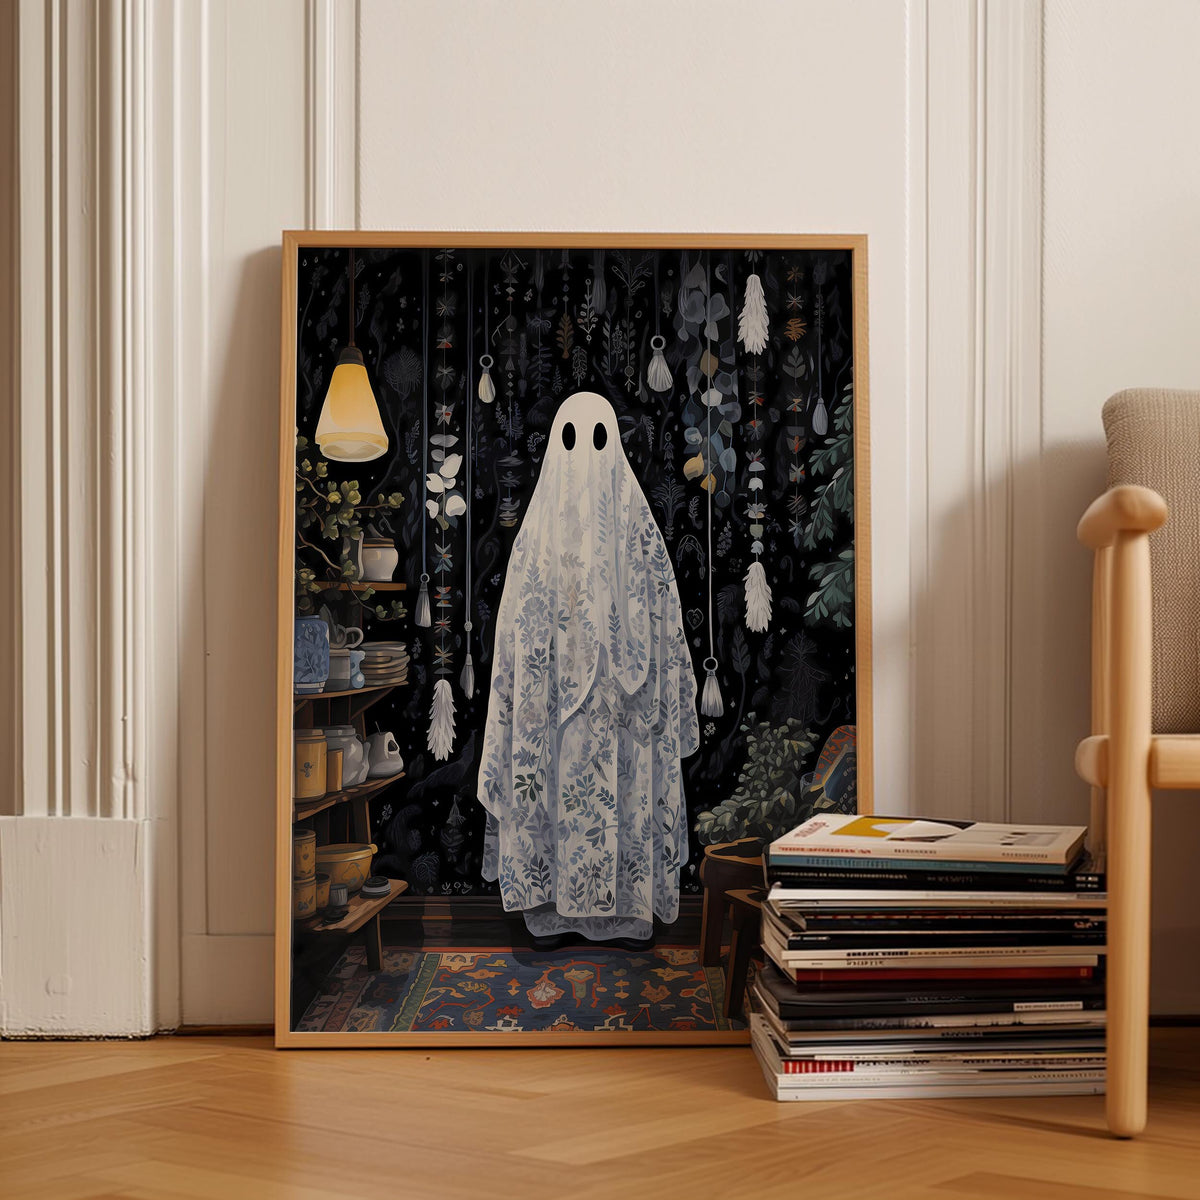 a picture of a ghost standing in front of a bookshelf